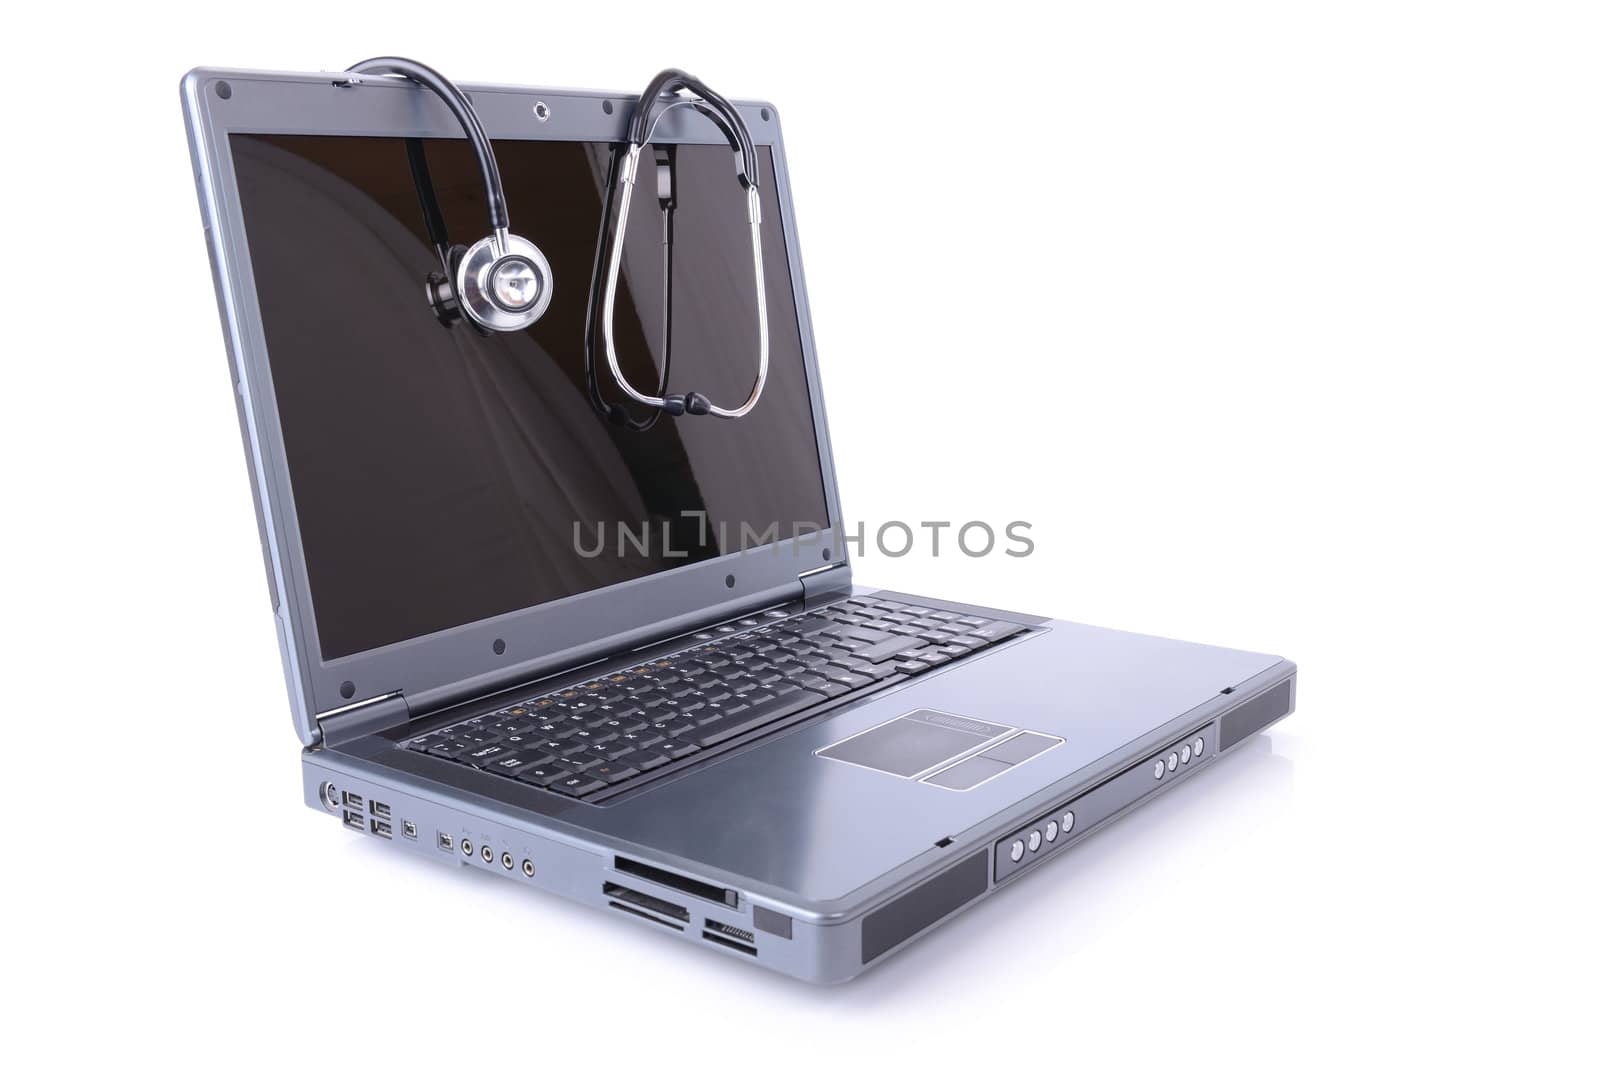 Stethoscope and laptop by hyrons